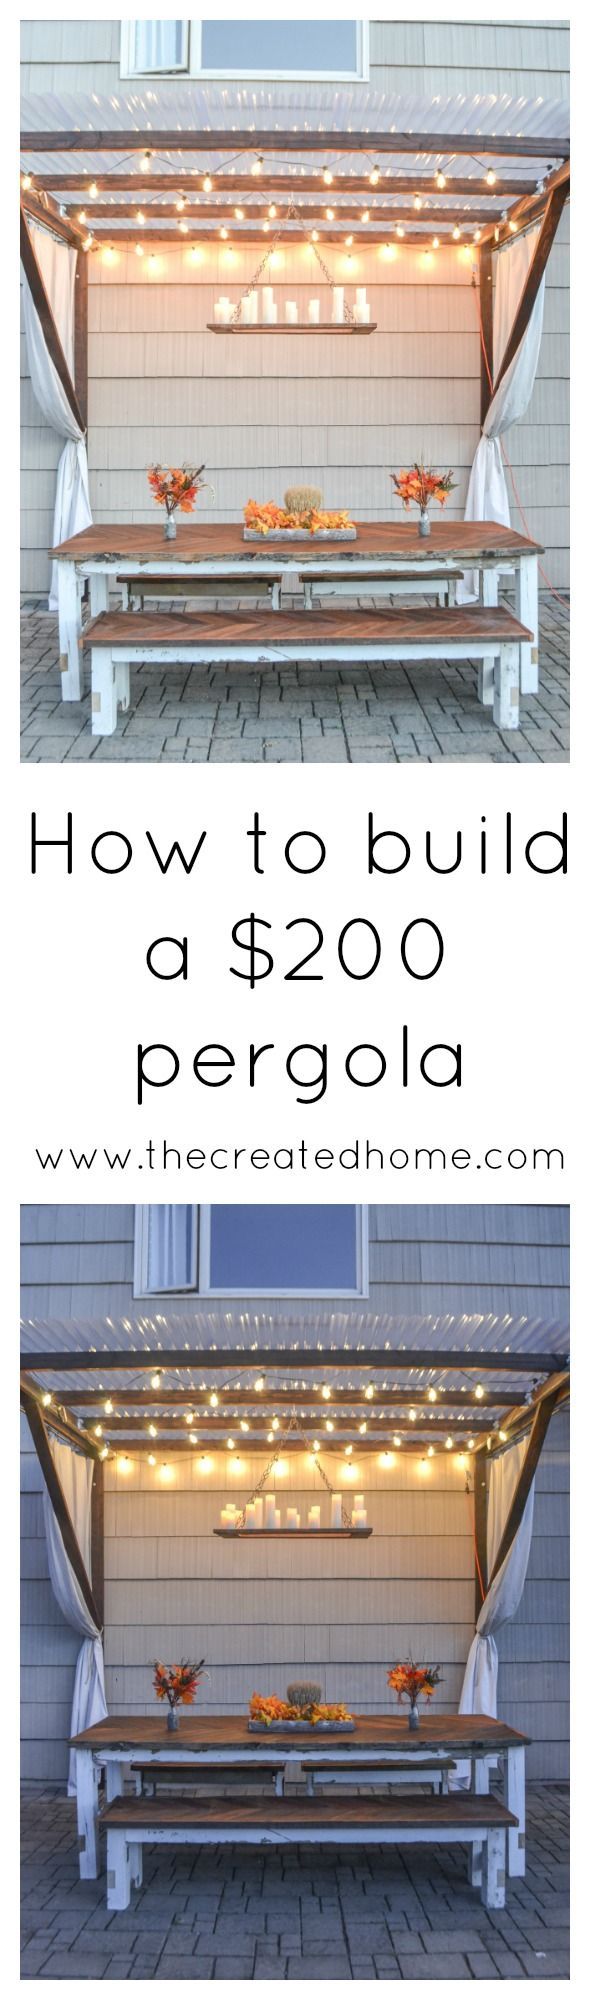 Build this modified pergola for $200, including the lights and curtains!